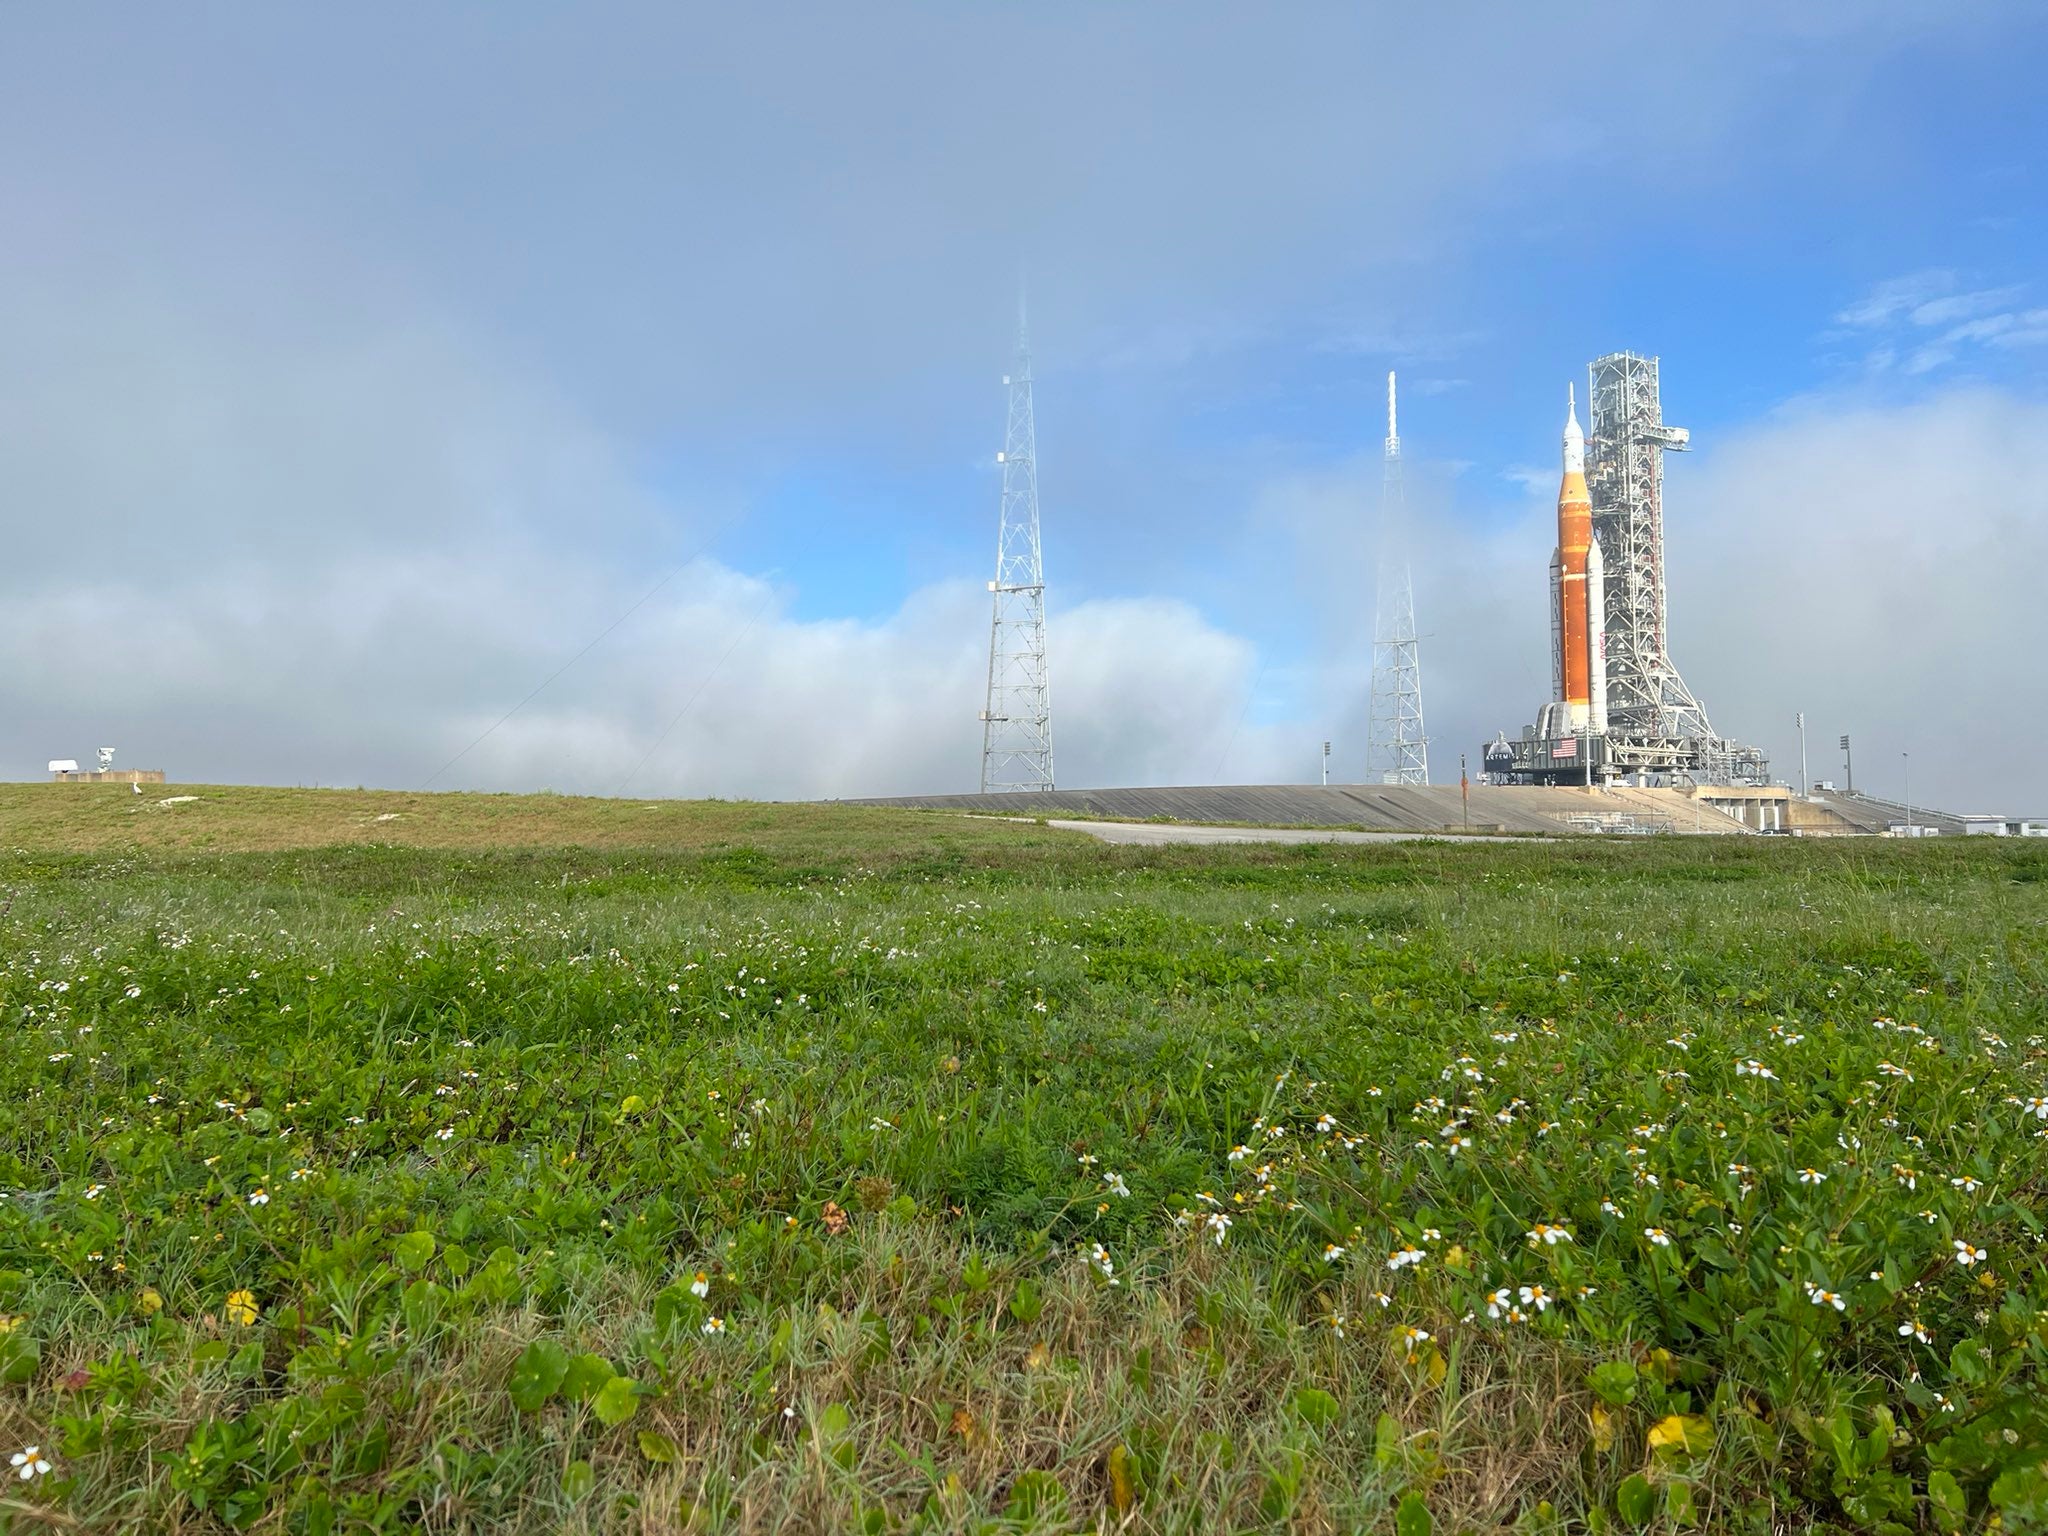 SLS at the launch pad on the morning of March 18, 2022. (Photo: NASA)